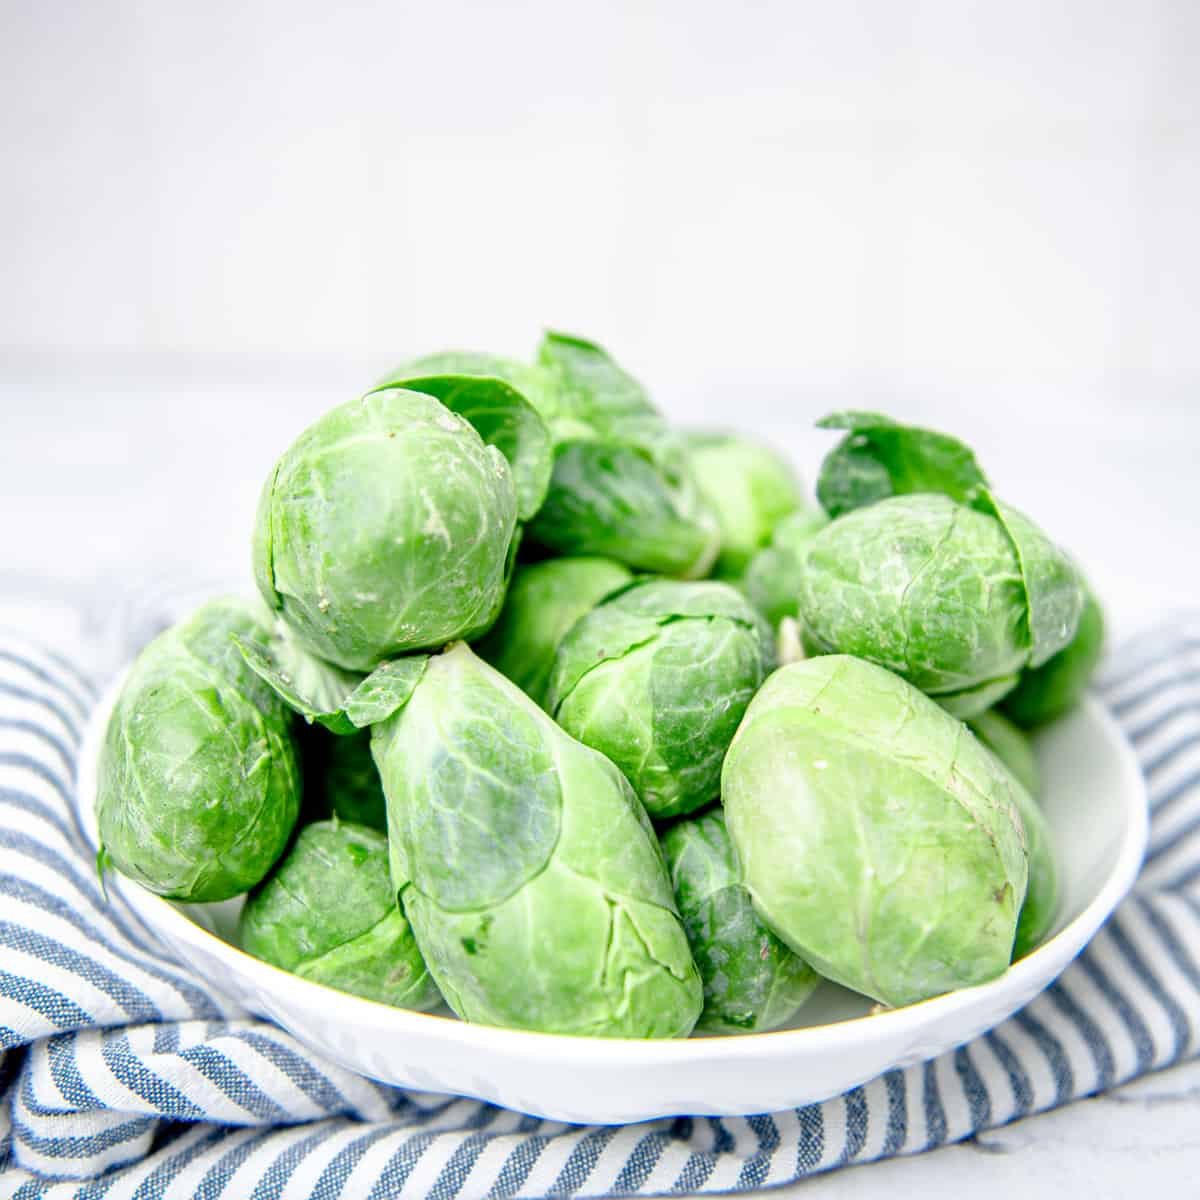 Brussel sprouts in white bowl with striped napkin.